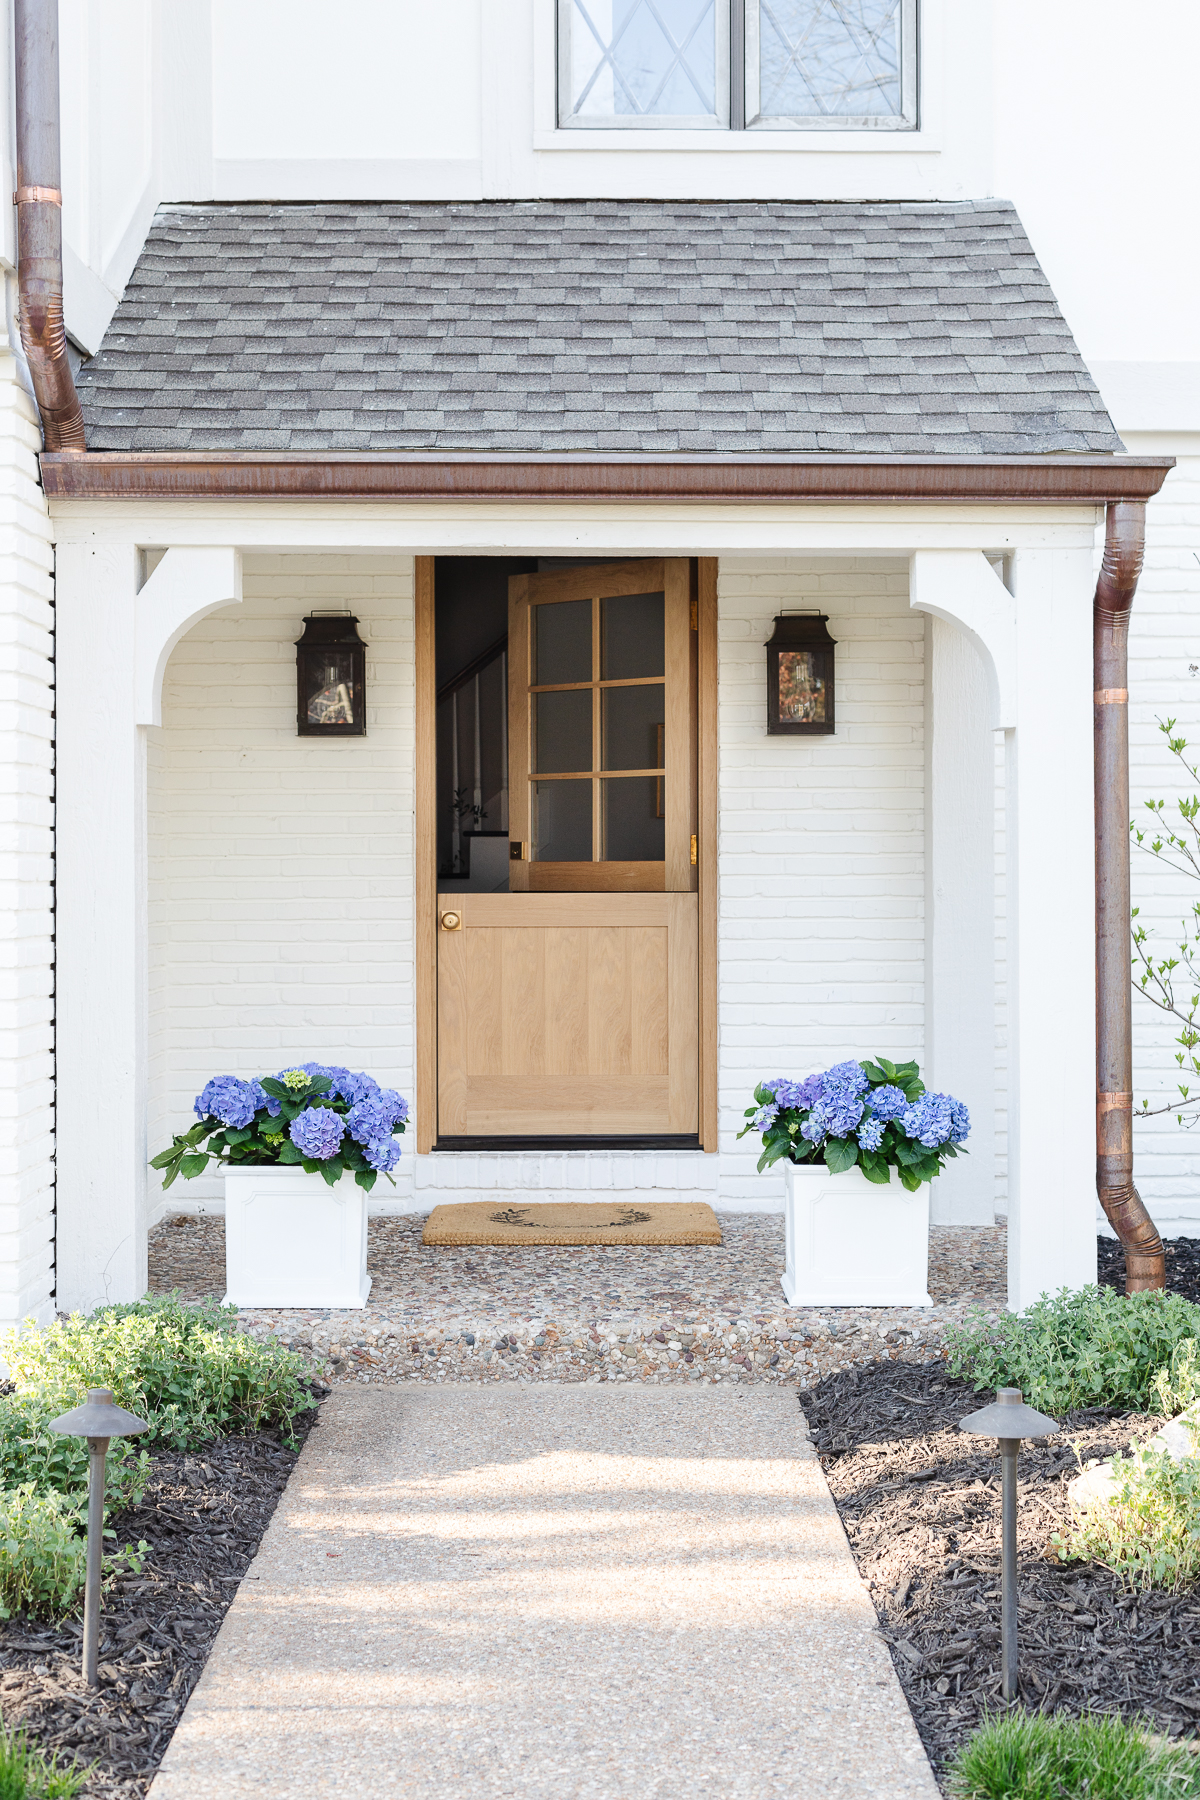 A white brick house with a wooden Dutch door and white planters on the spring porch, filled with blue hydrangeas.